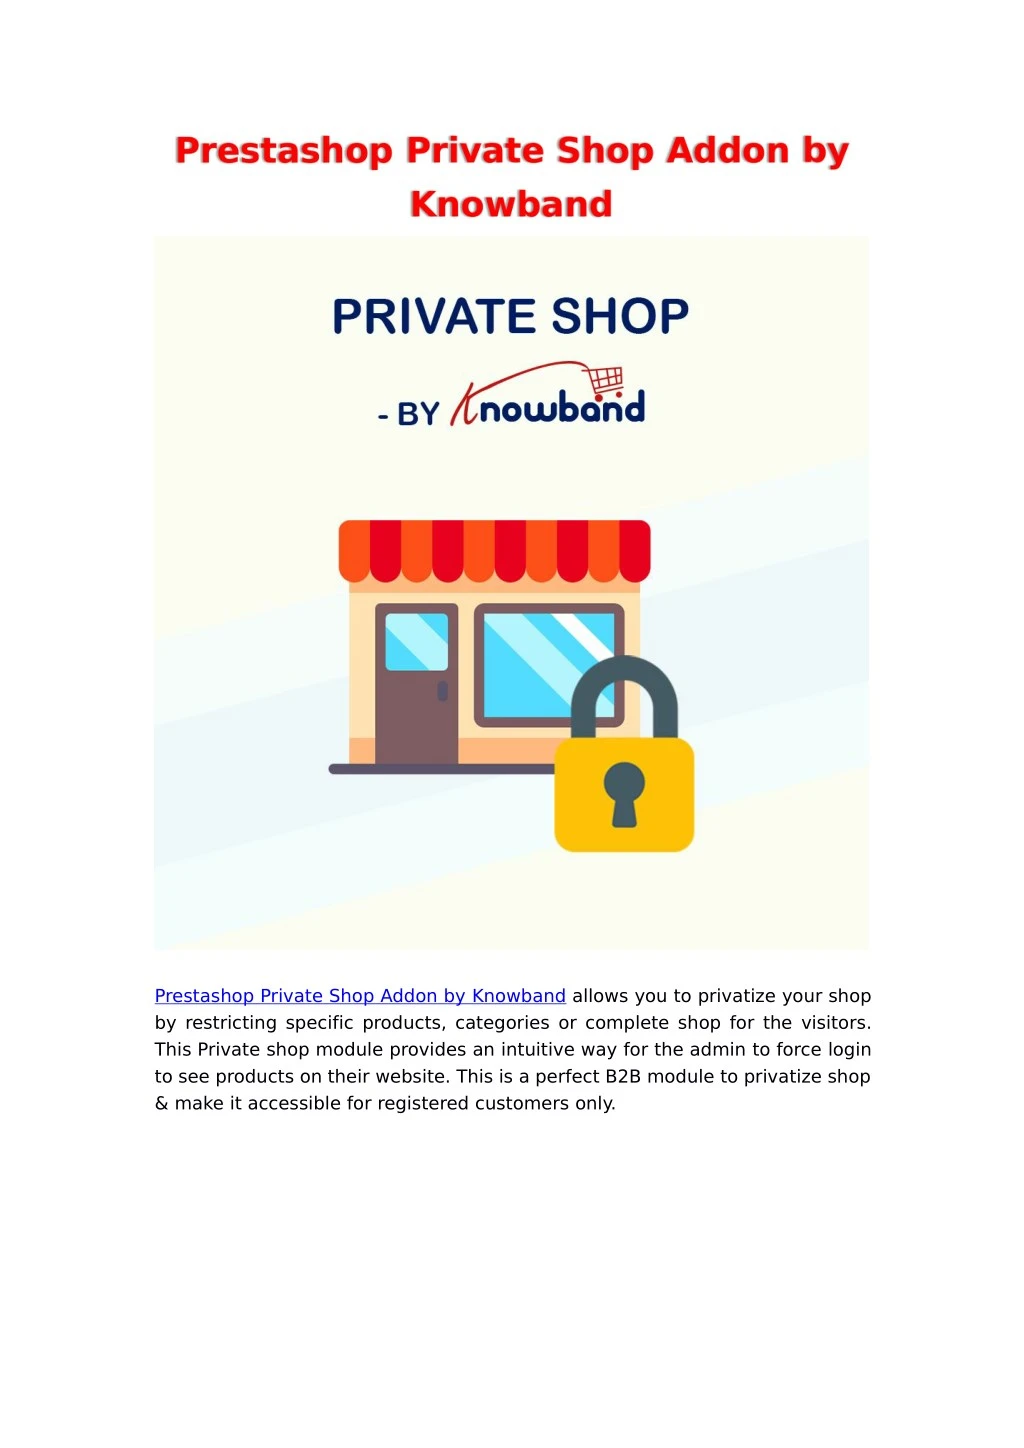 prestashop private shop addon by knowband allows